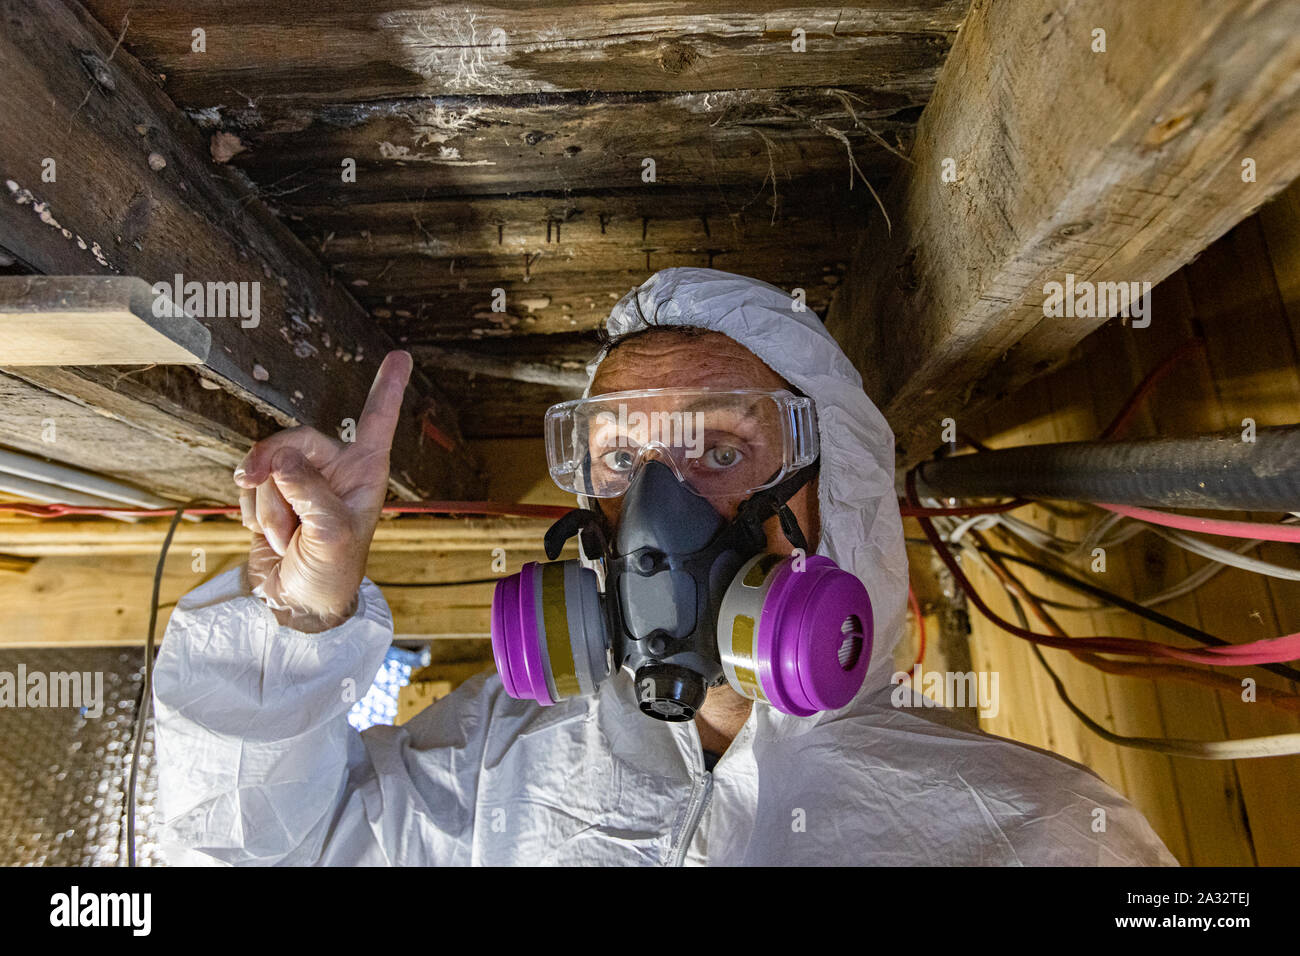 An indoor home inspector points towards condemned wood inside a domestic building, white fungi are seen growing on joists and floor planks, rotting wood indoor Stock Photo